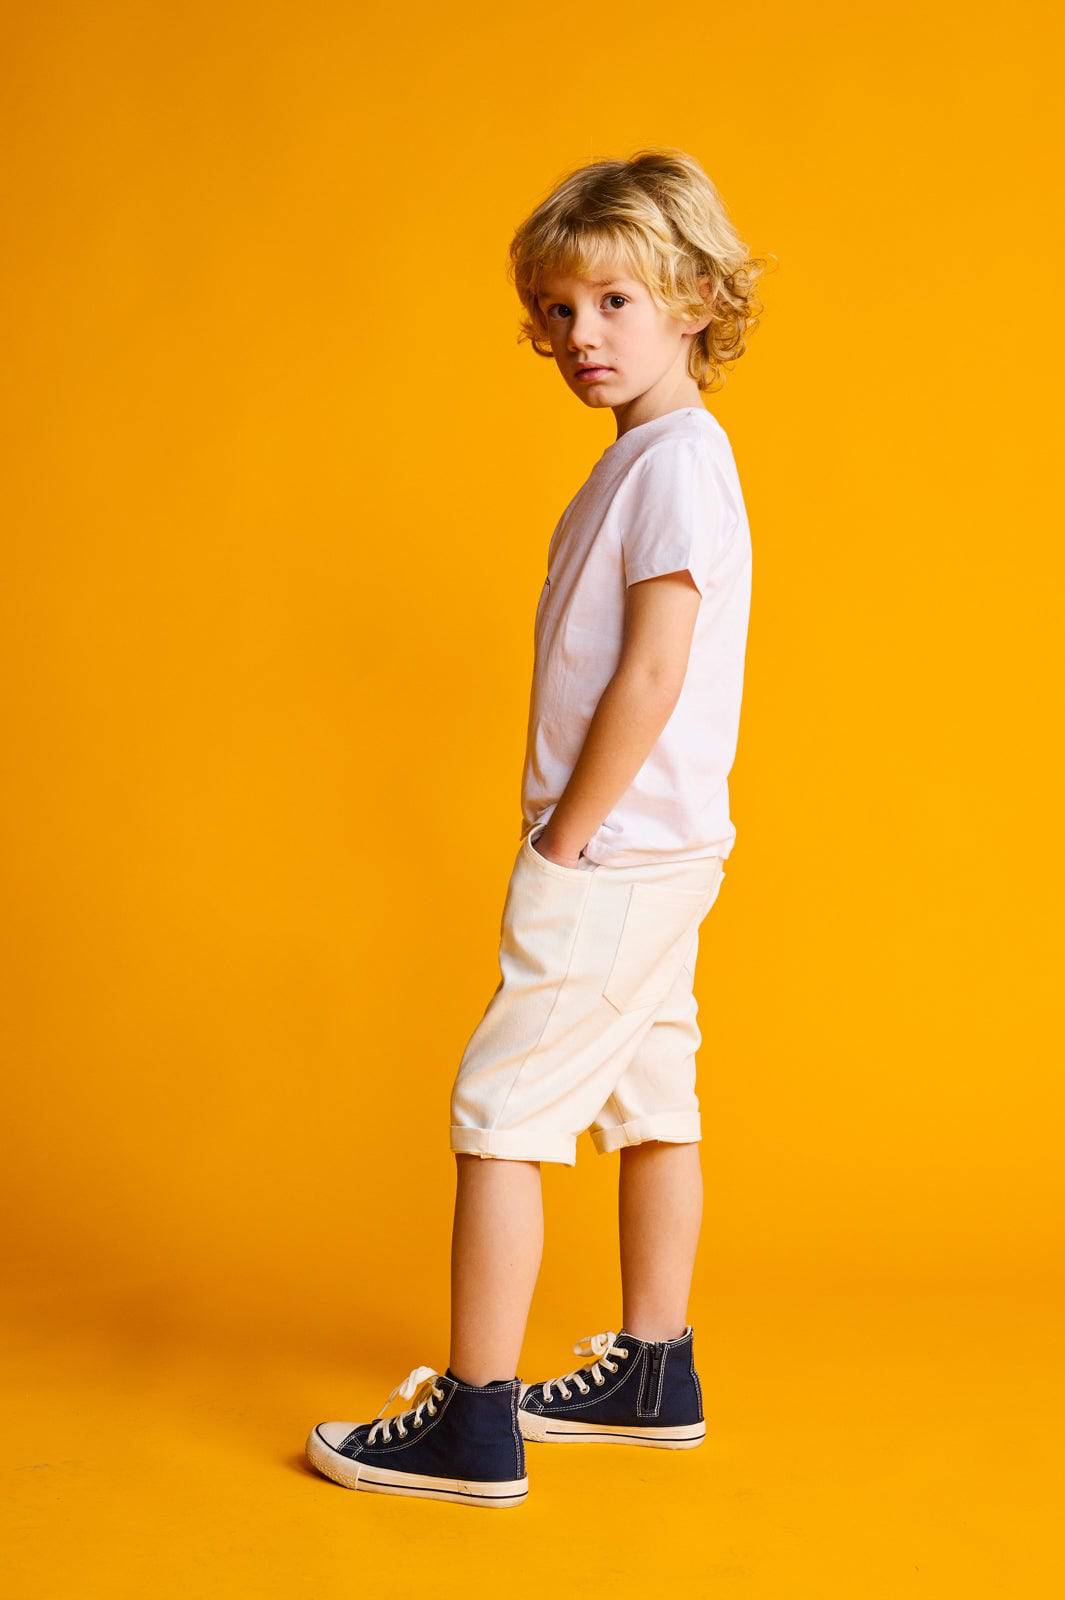 The Fisherman T-Shirt (boys) - CooCootales